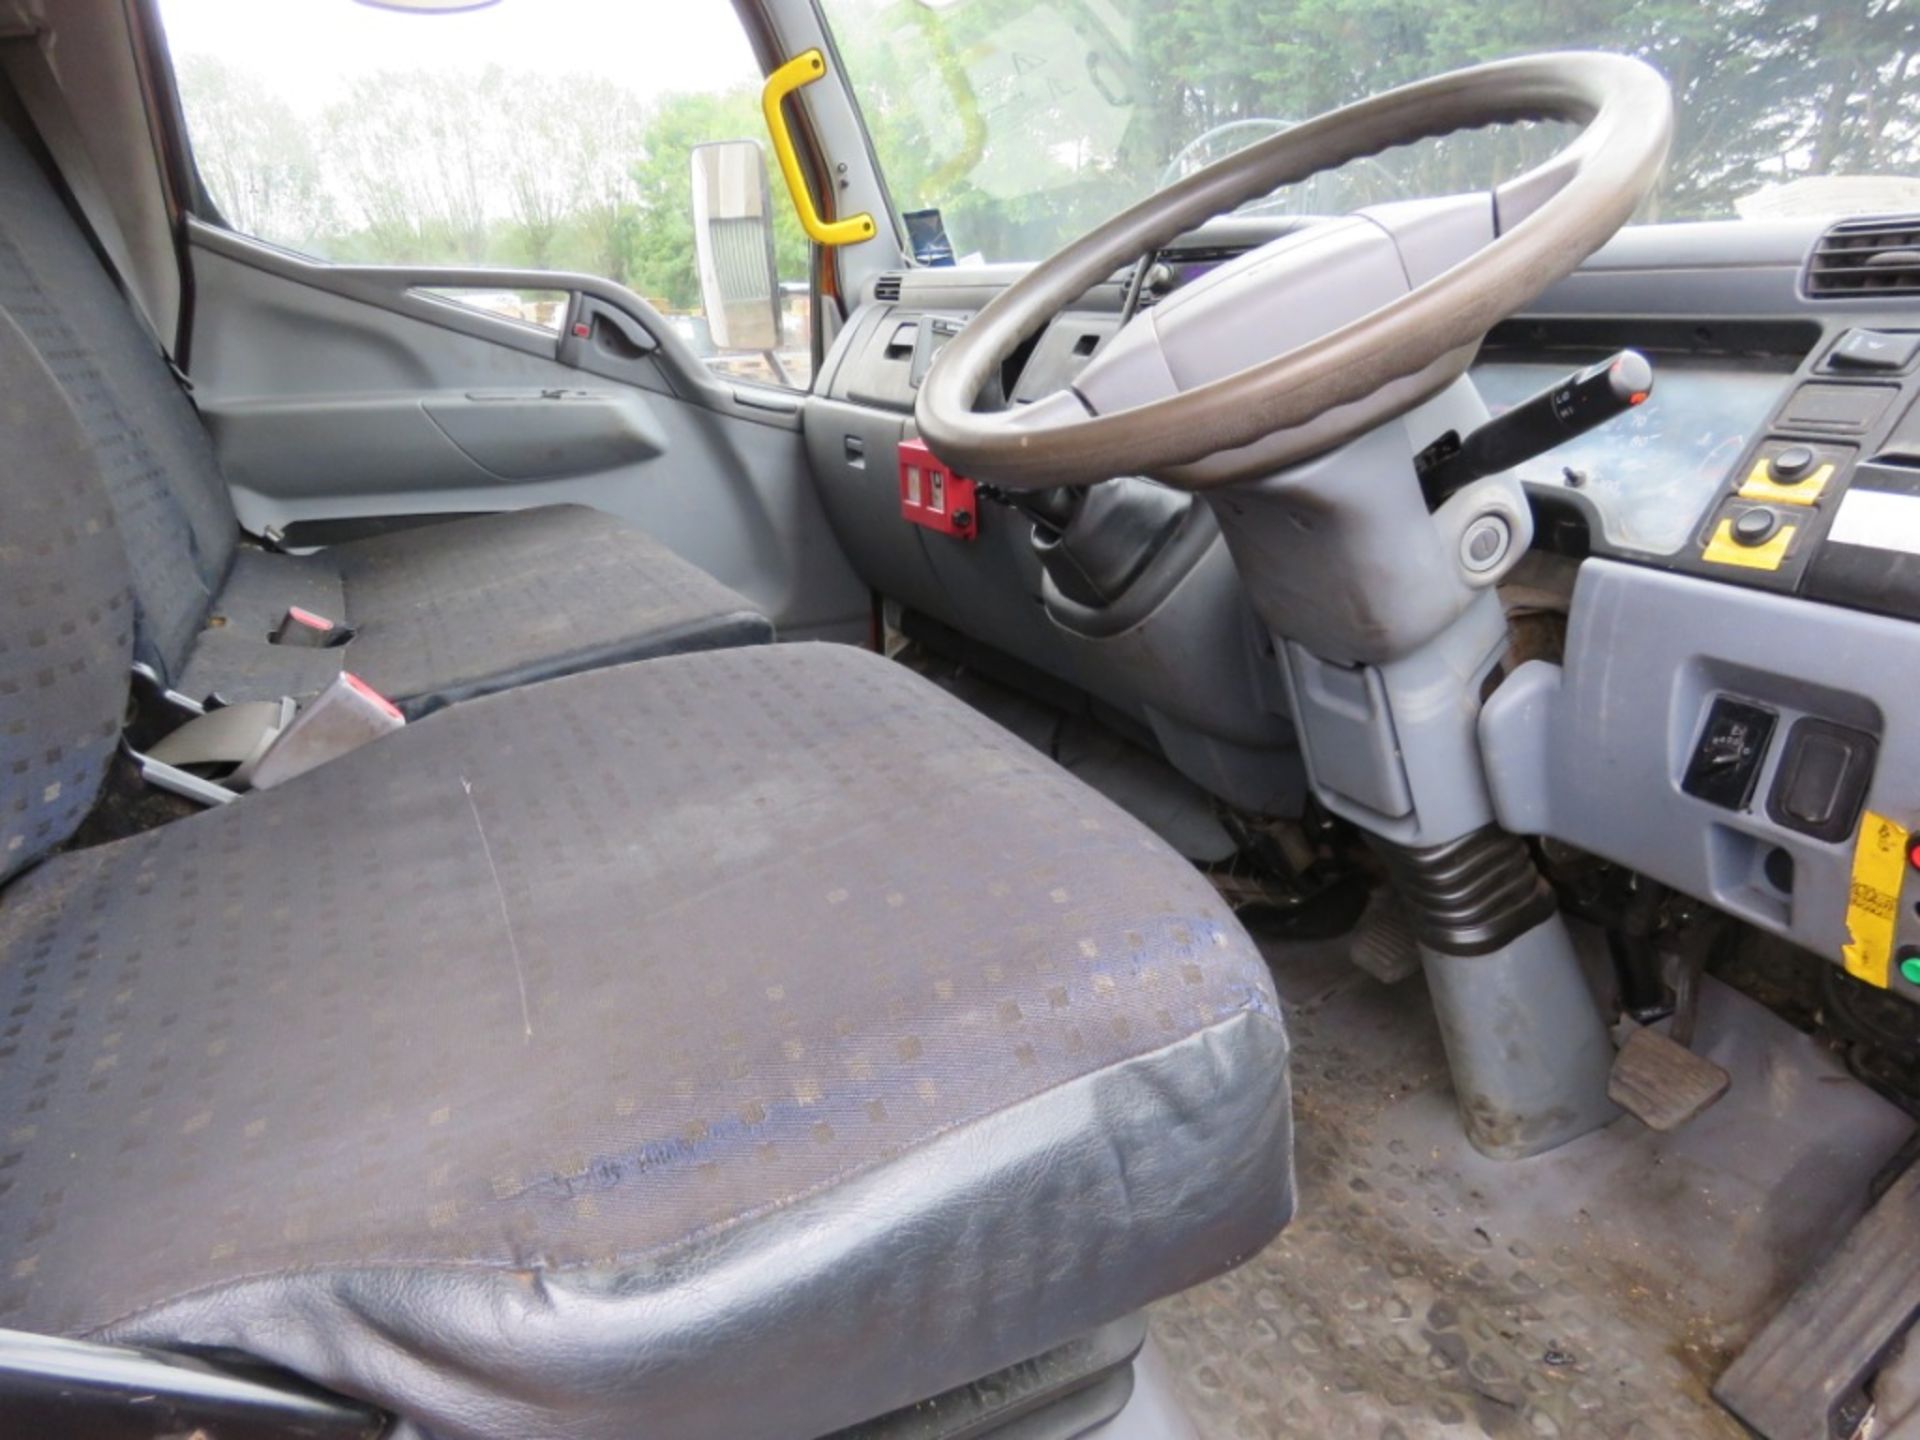 MITSUBISHI FUSO 7500KG TIPPER REG:YH12 SUY. MANUAL GEARBOX. ELECTRIC POWERED TIPPING. THOMPSON BODY. - Image 10 of 12